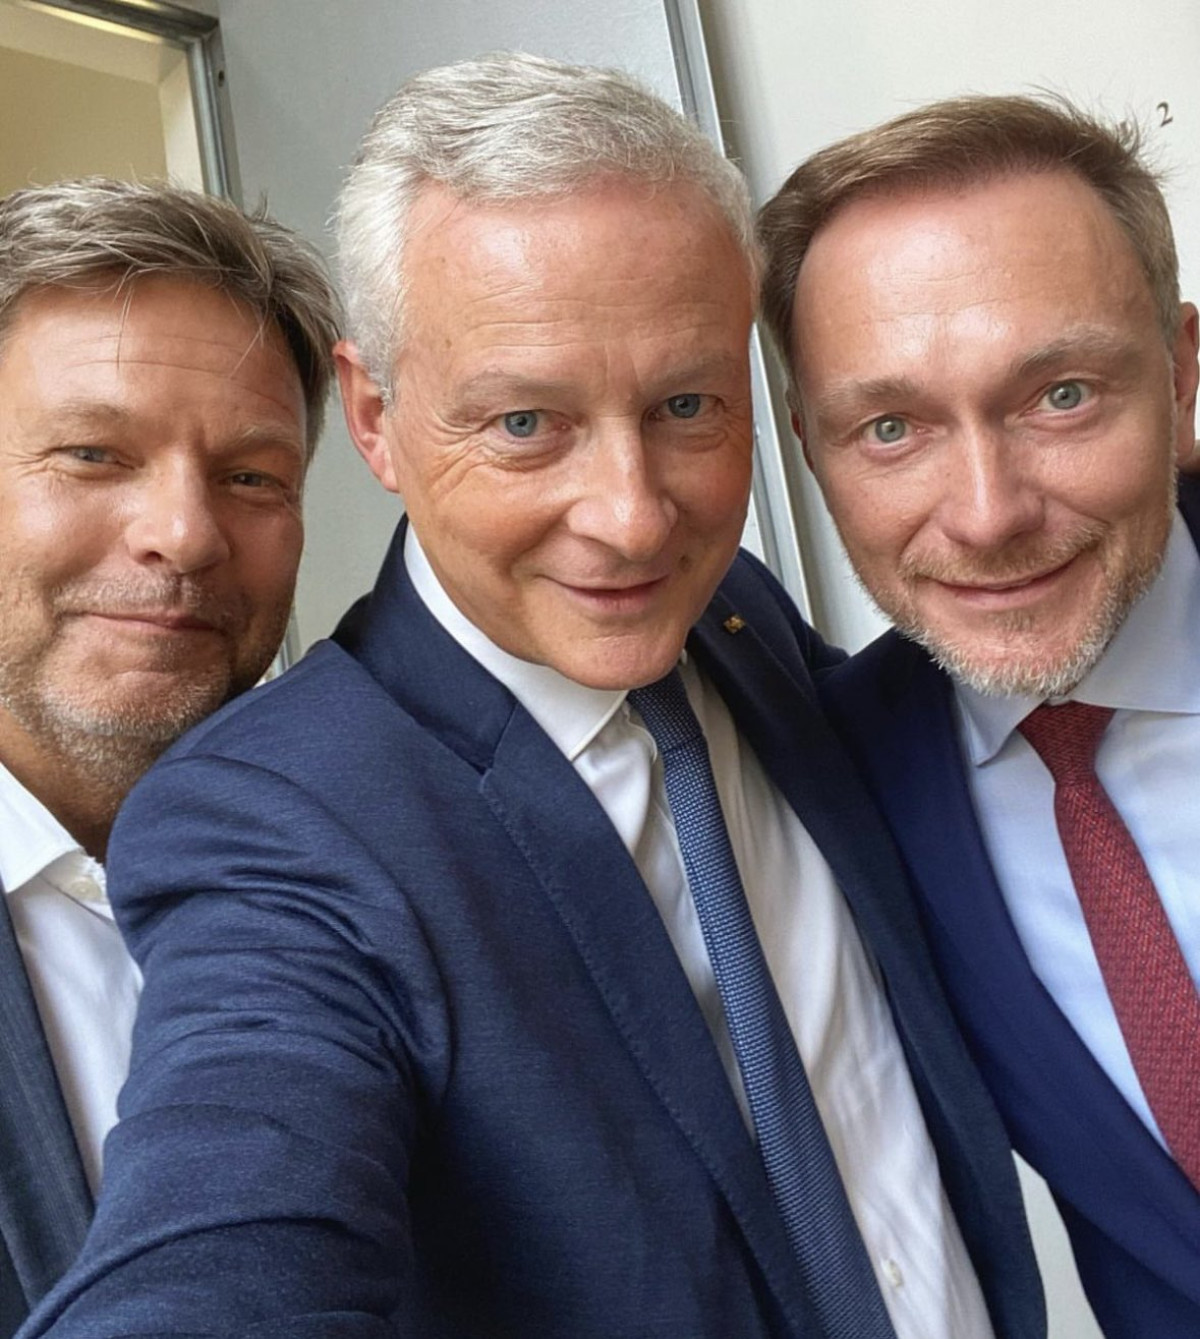 "The Franco-German friendship in action" - French economy minister Le Maire (centre) posted a picture of himself together with German counterpart Robert Habeck (left) and finance minister Christian Lindner on social media outlet 'X'. Source: X / Bruno Le Maire